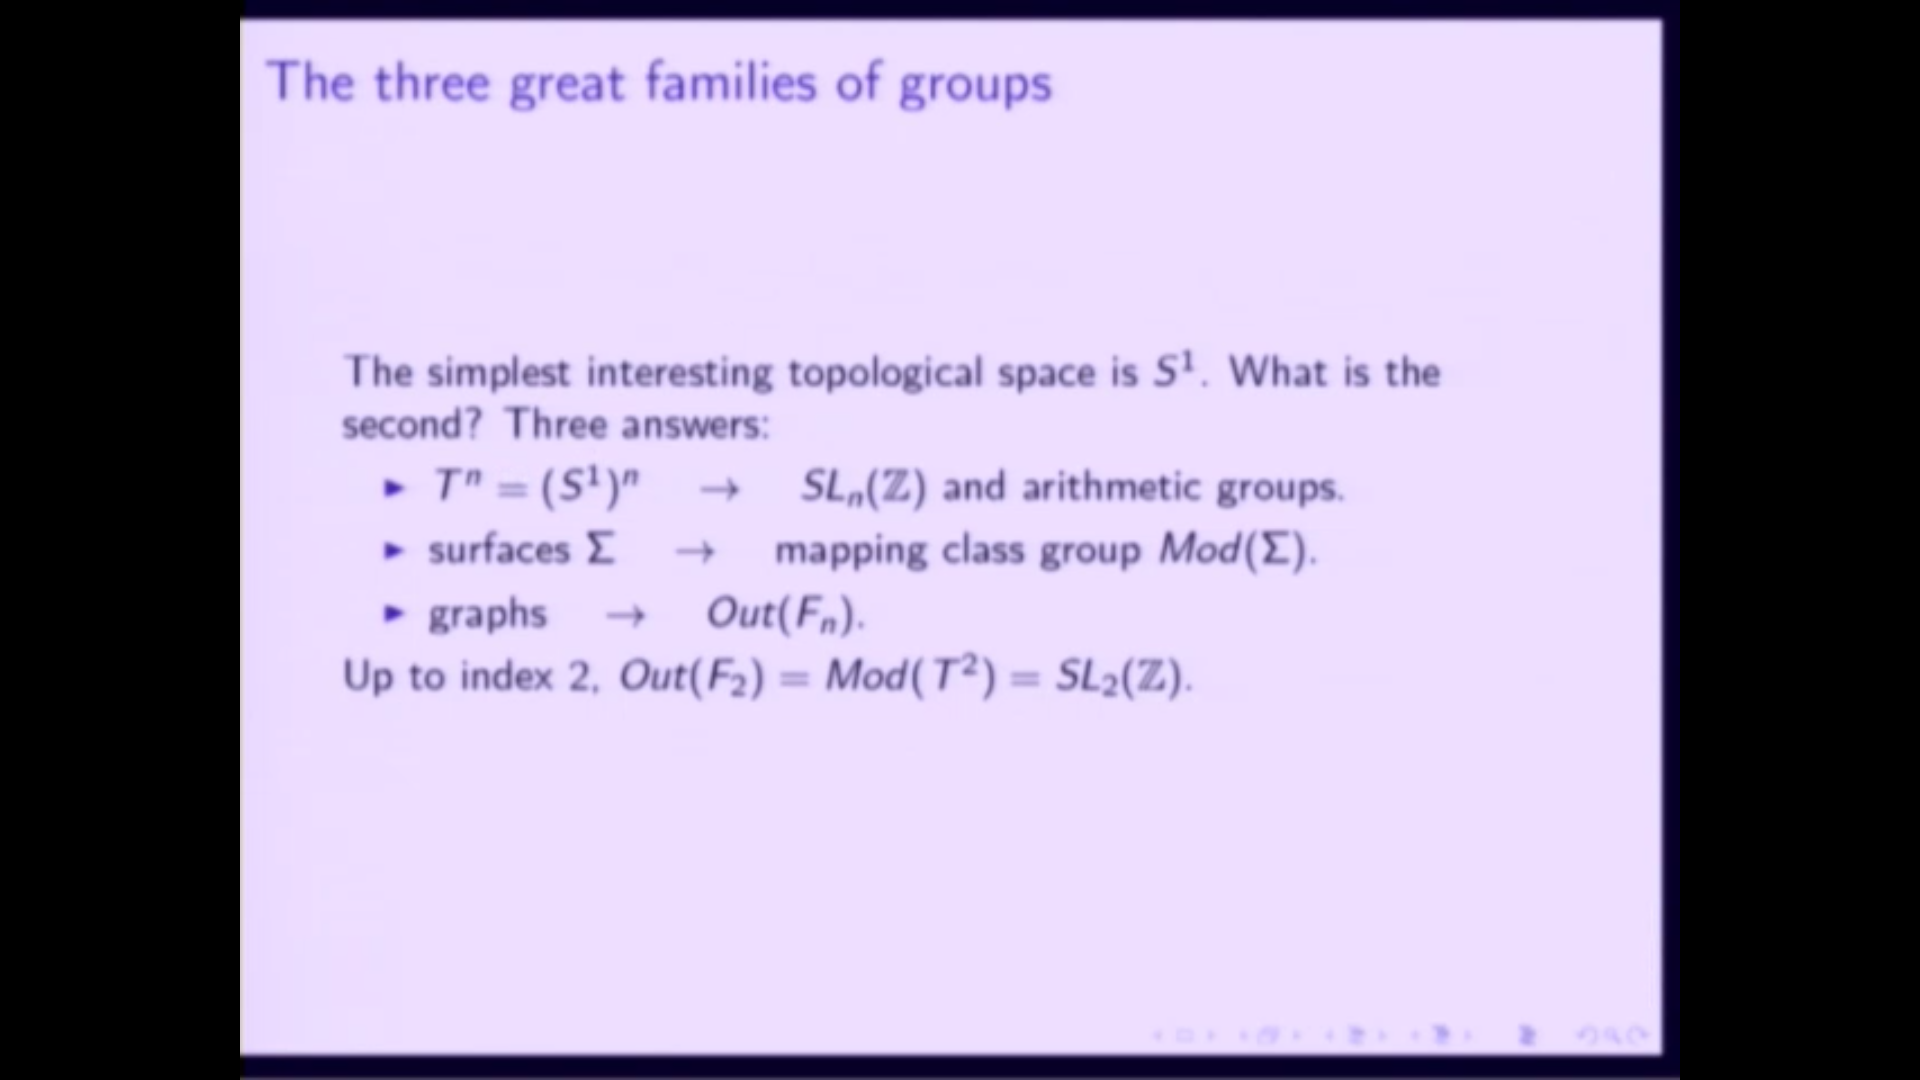 Mapping class groups and Out(F_n) Thumbnail